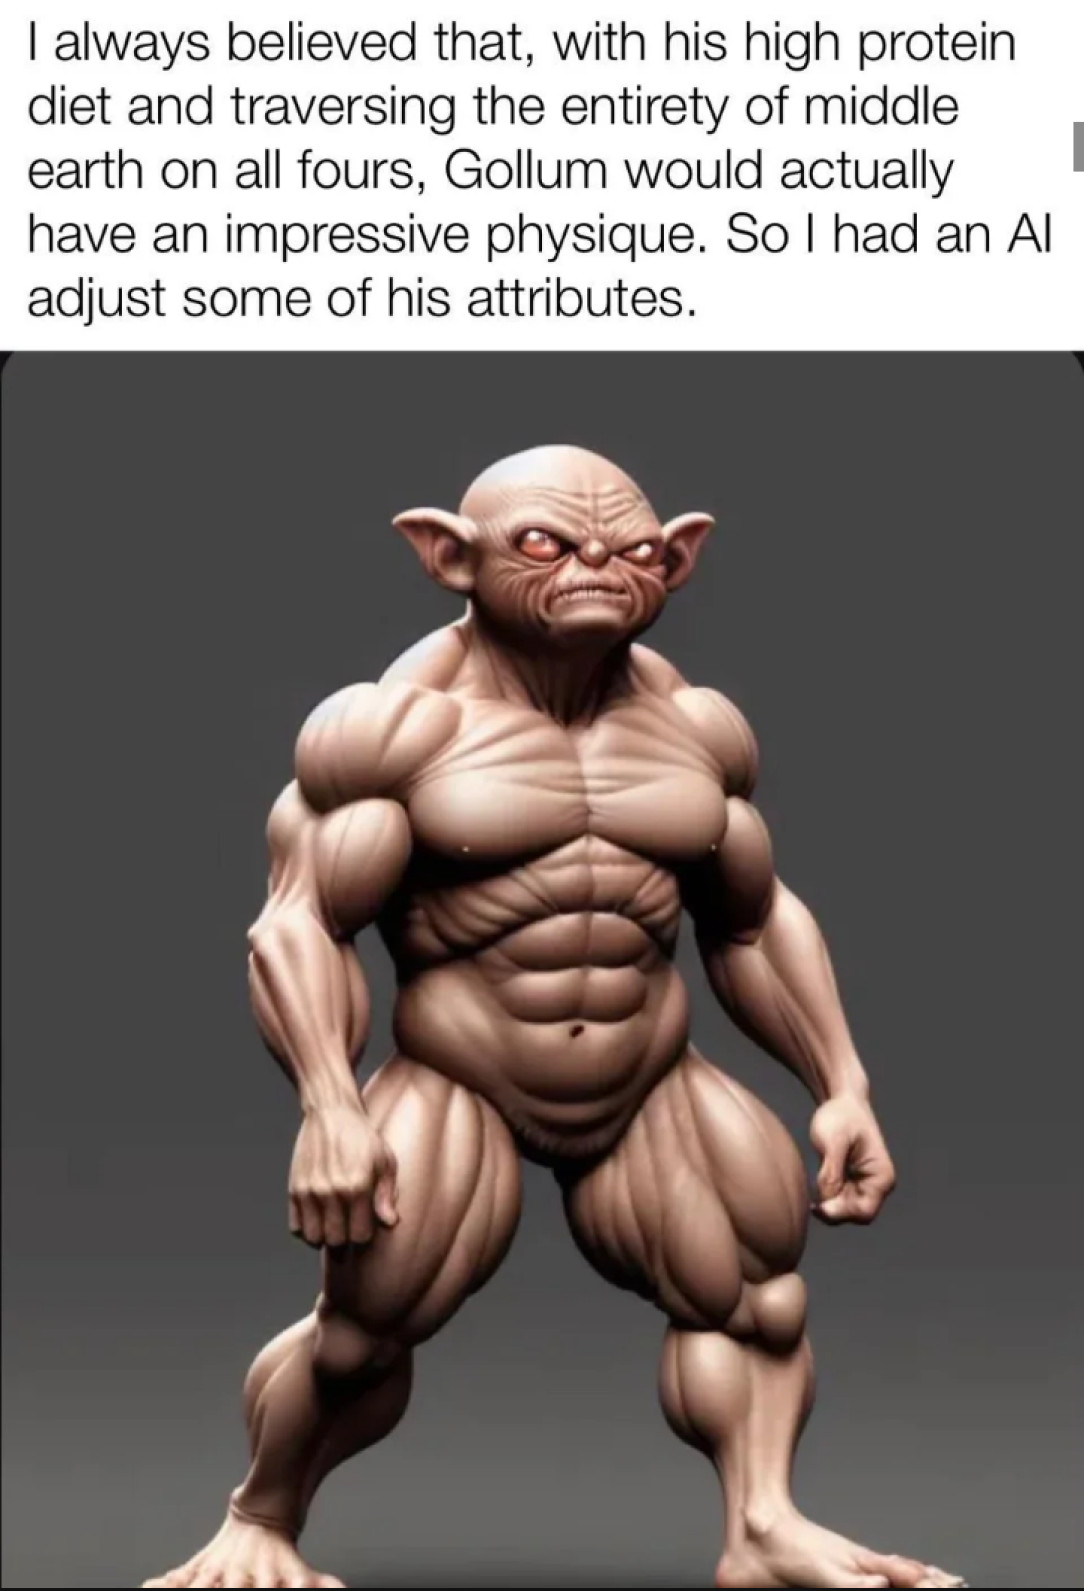 Gymlum, possessor of the most muscular body in Middle Earth